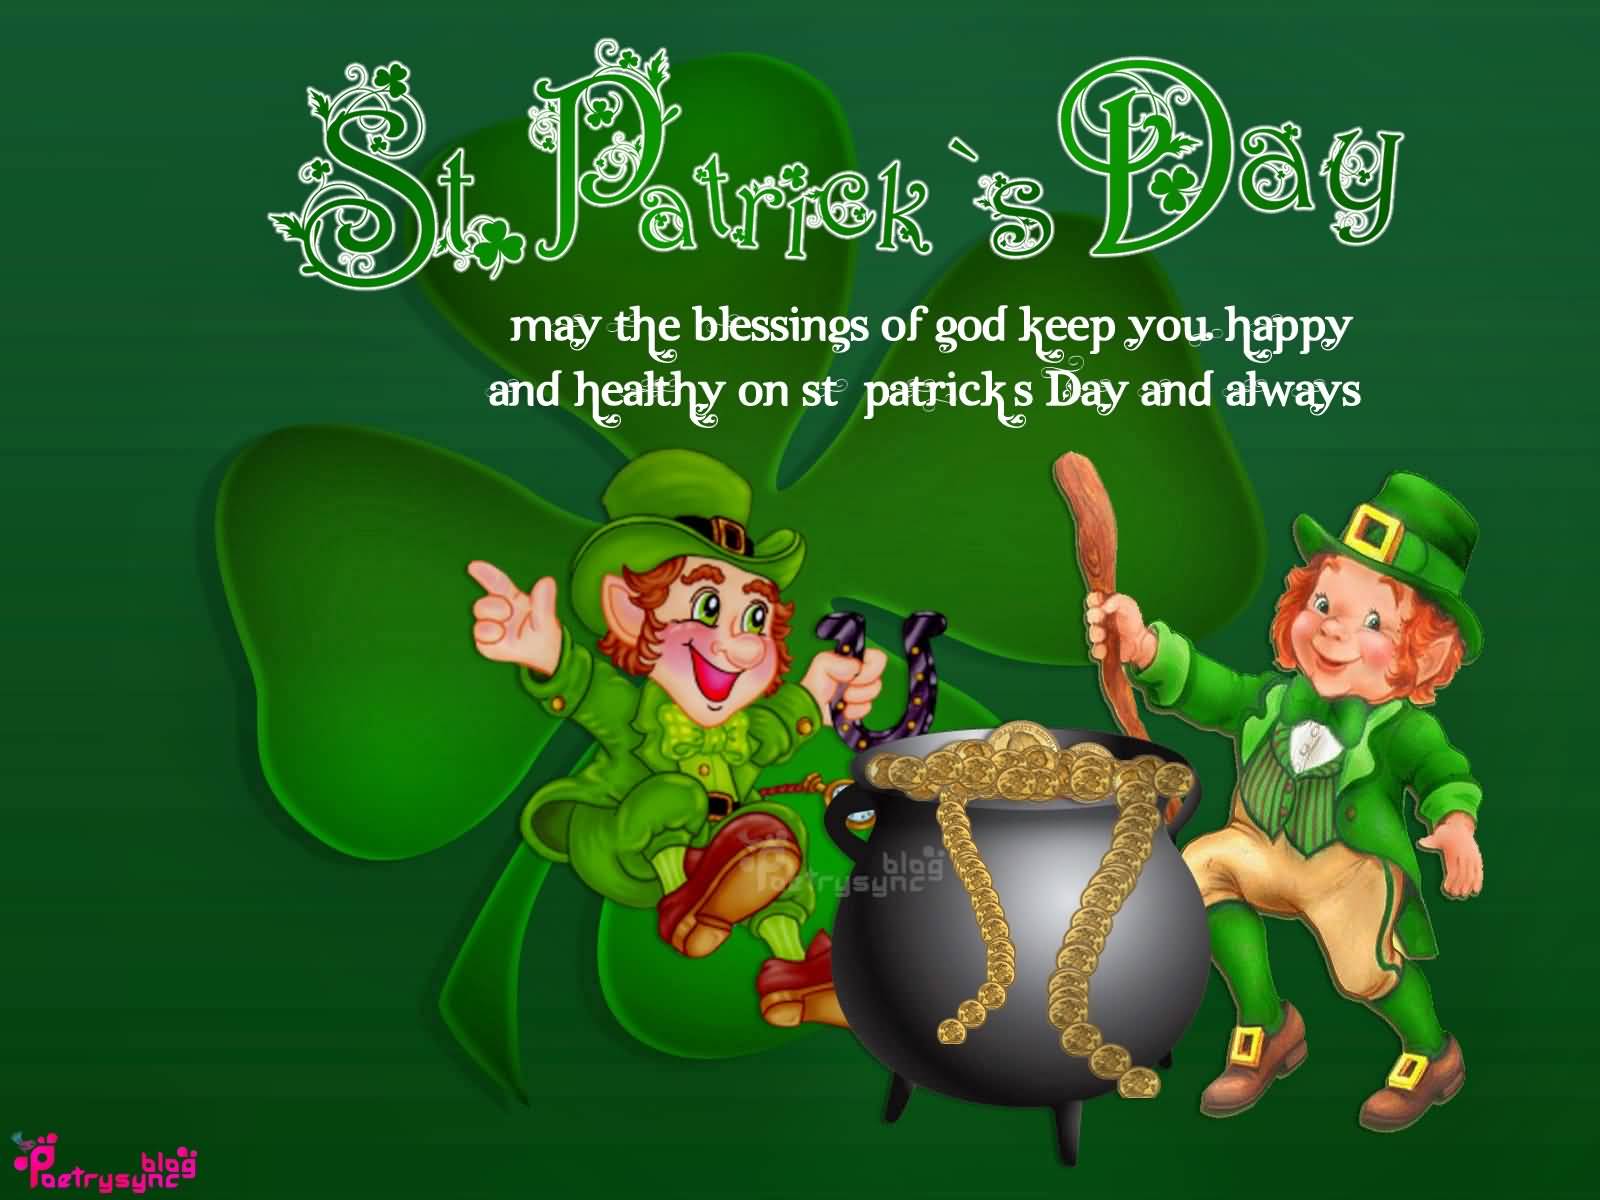 Saint Patrick's Day May The Blessings Of Good Keep You Happy And Healthy On Saint Patrick's Day And Always